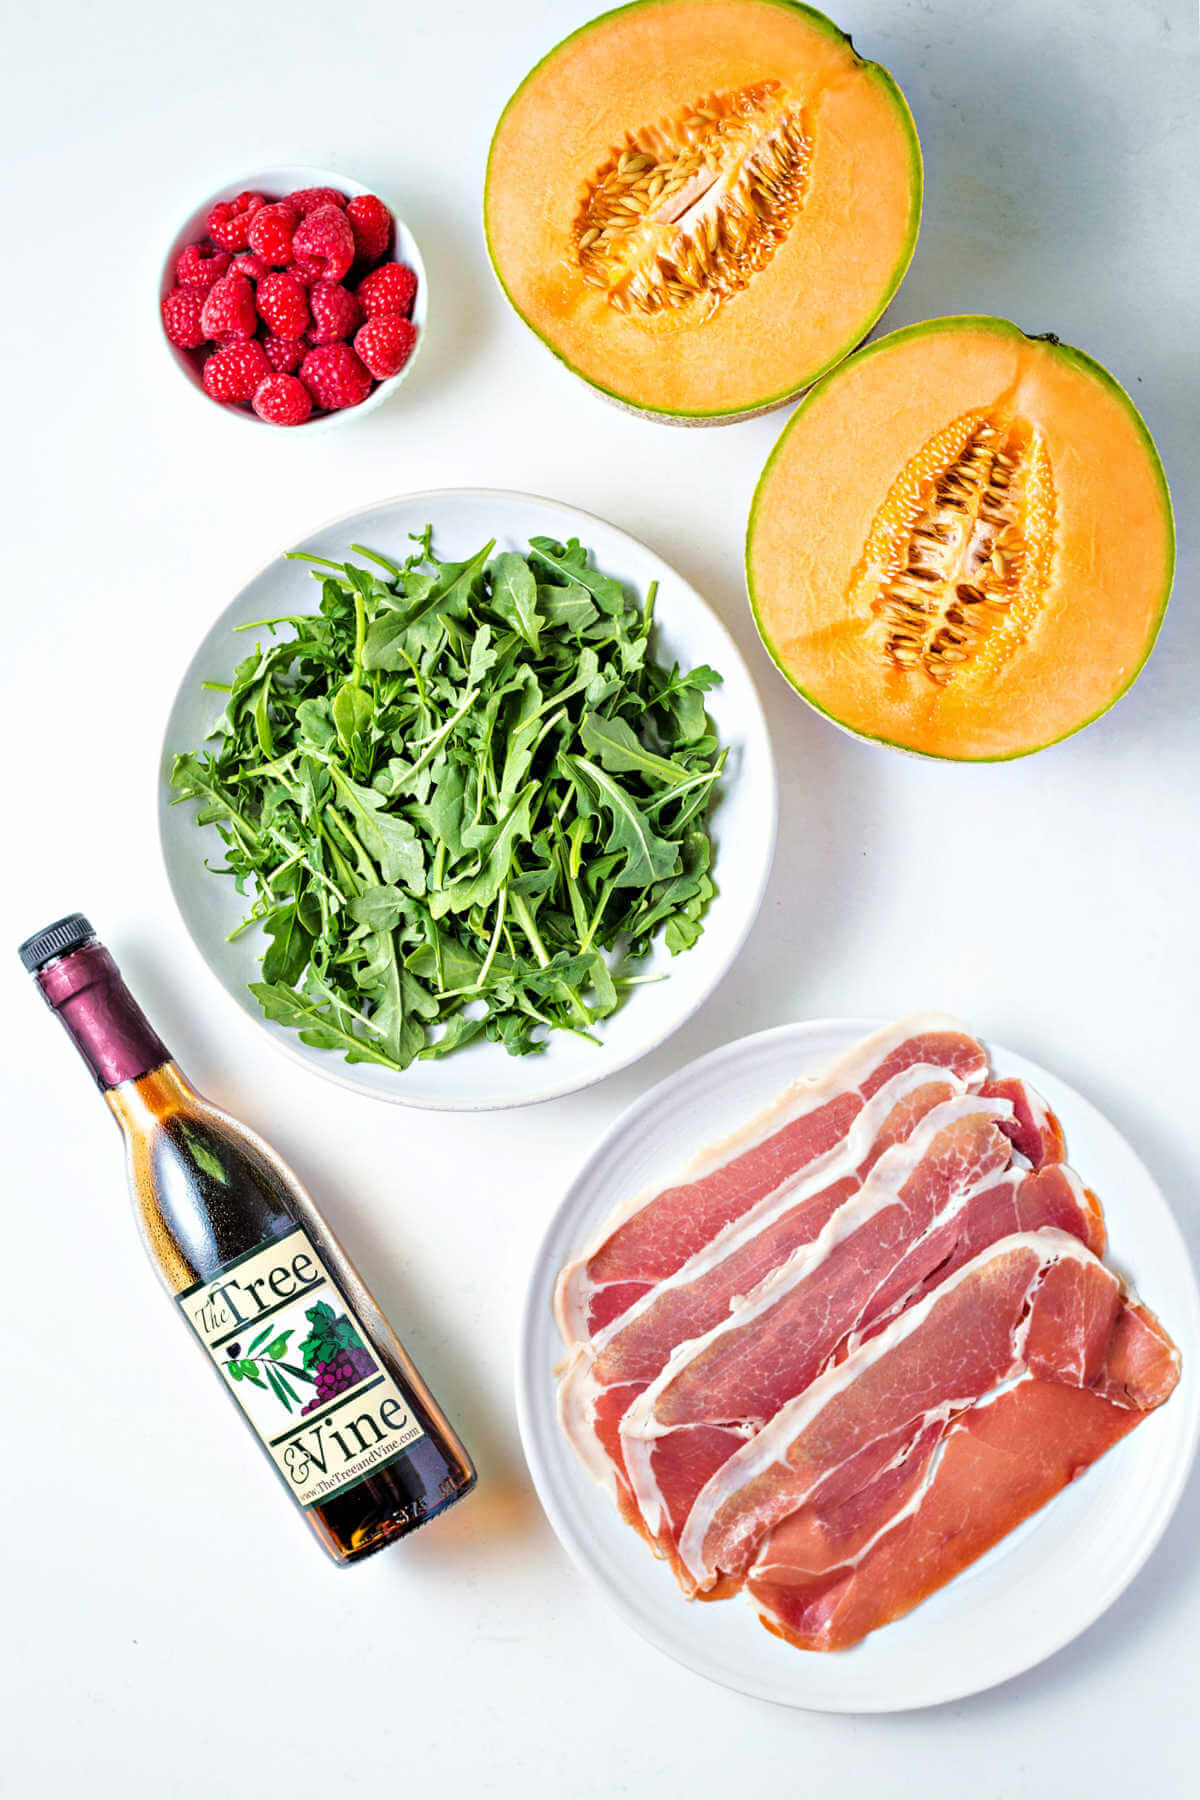 ingredients for Prosciutto and Melon on a table.